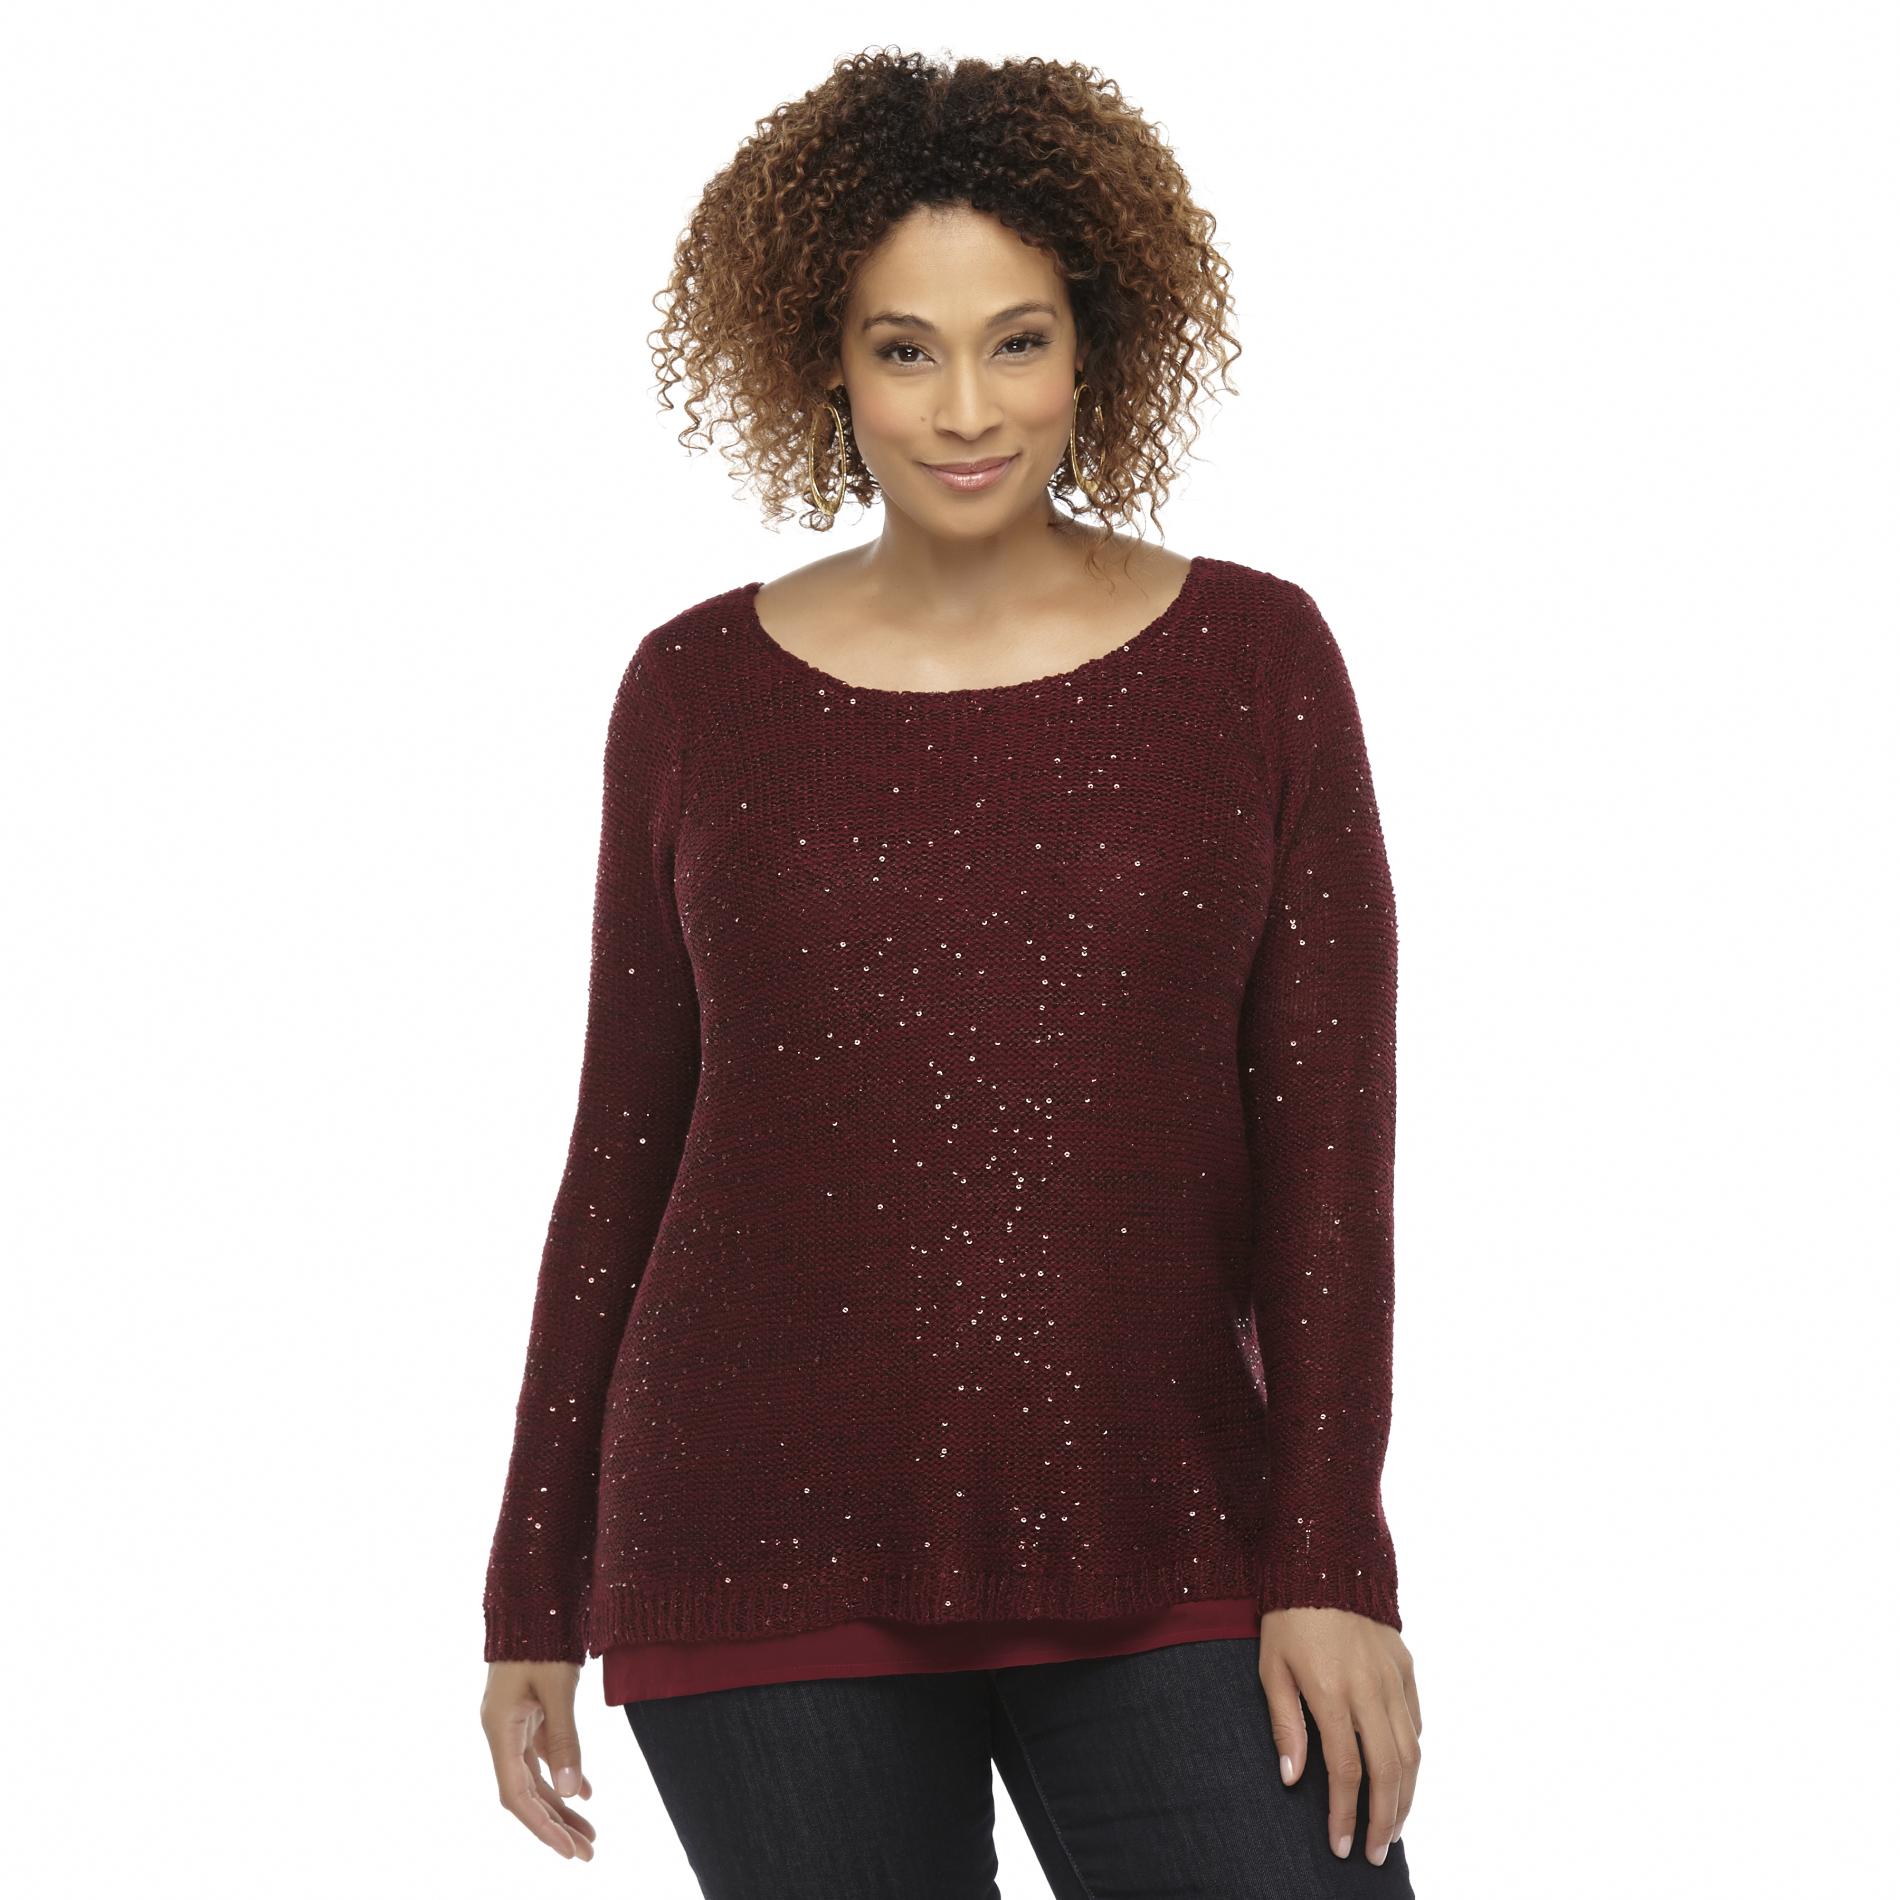 Jaclyn Smith Women's Plus Embellished Layered-Look Top